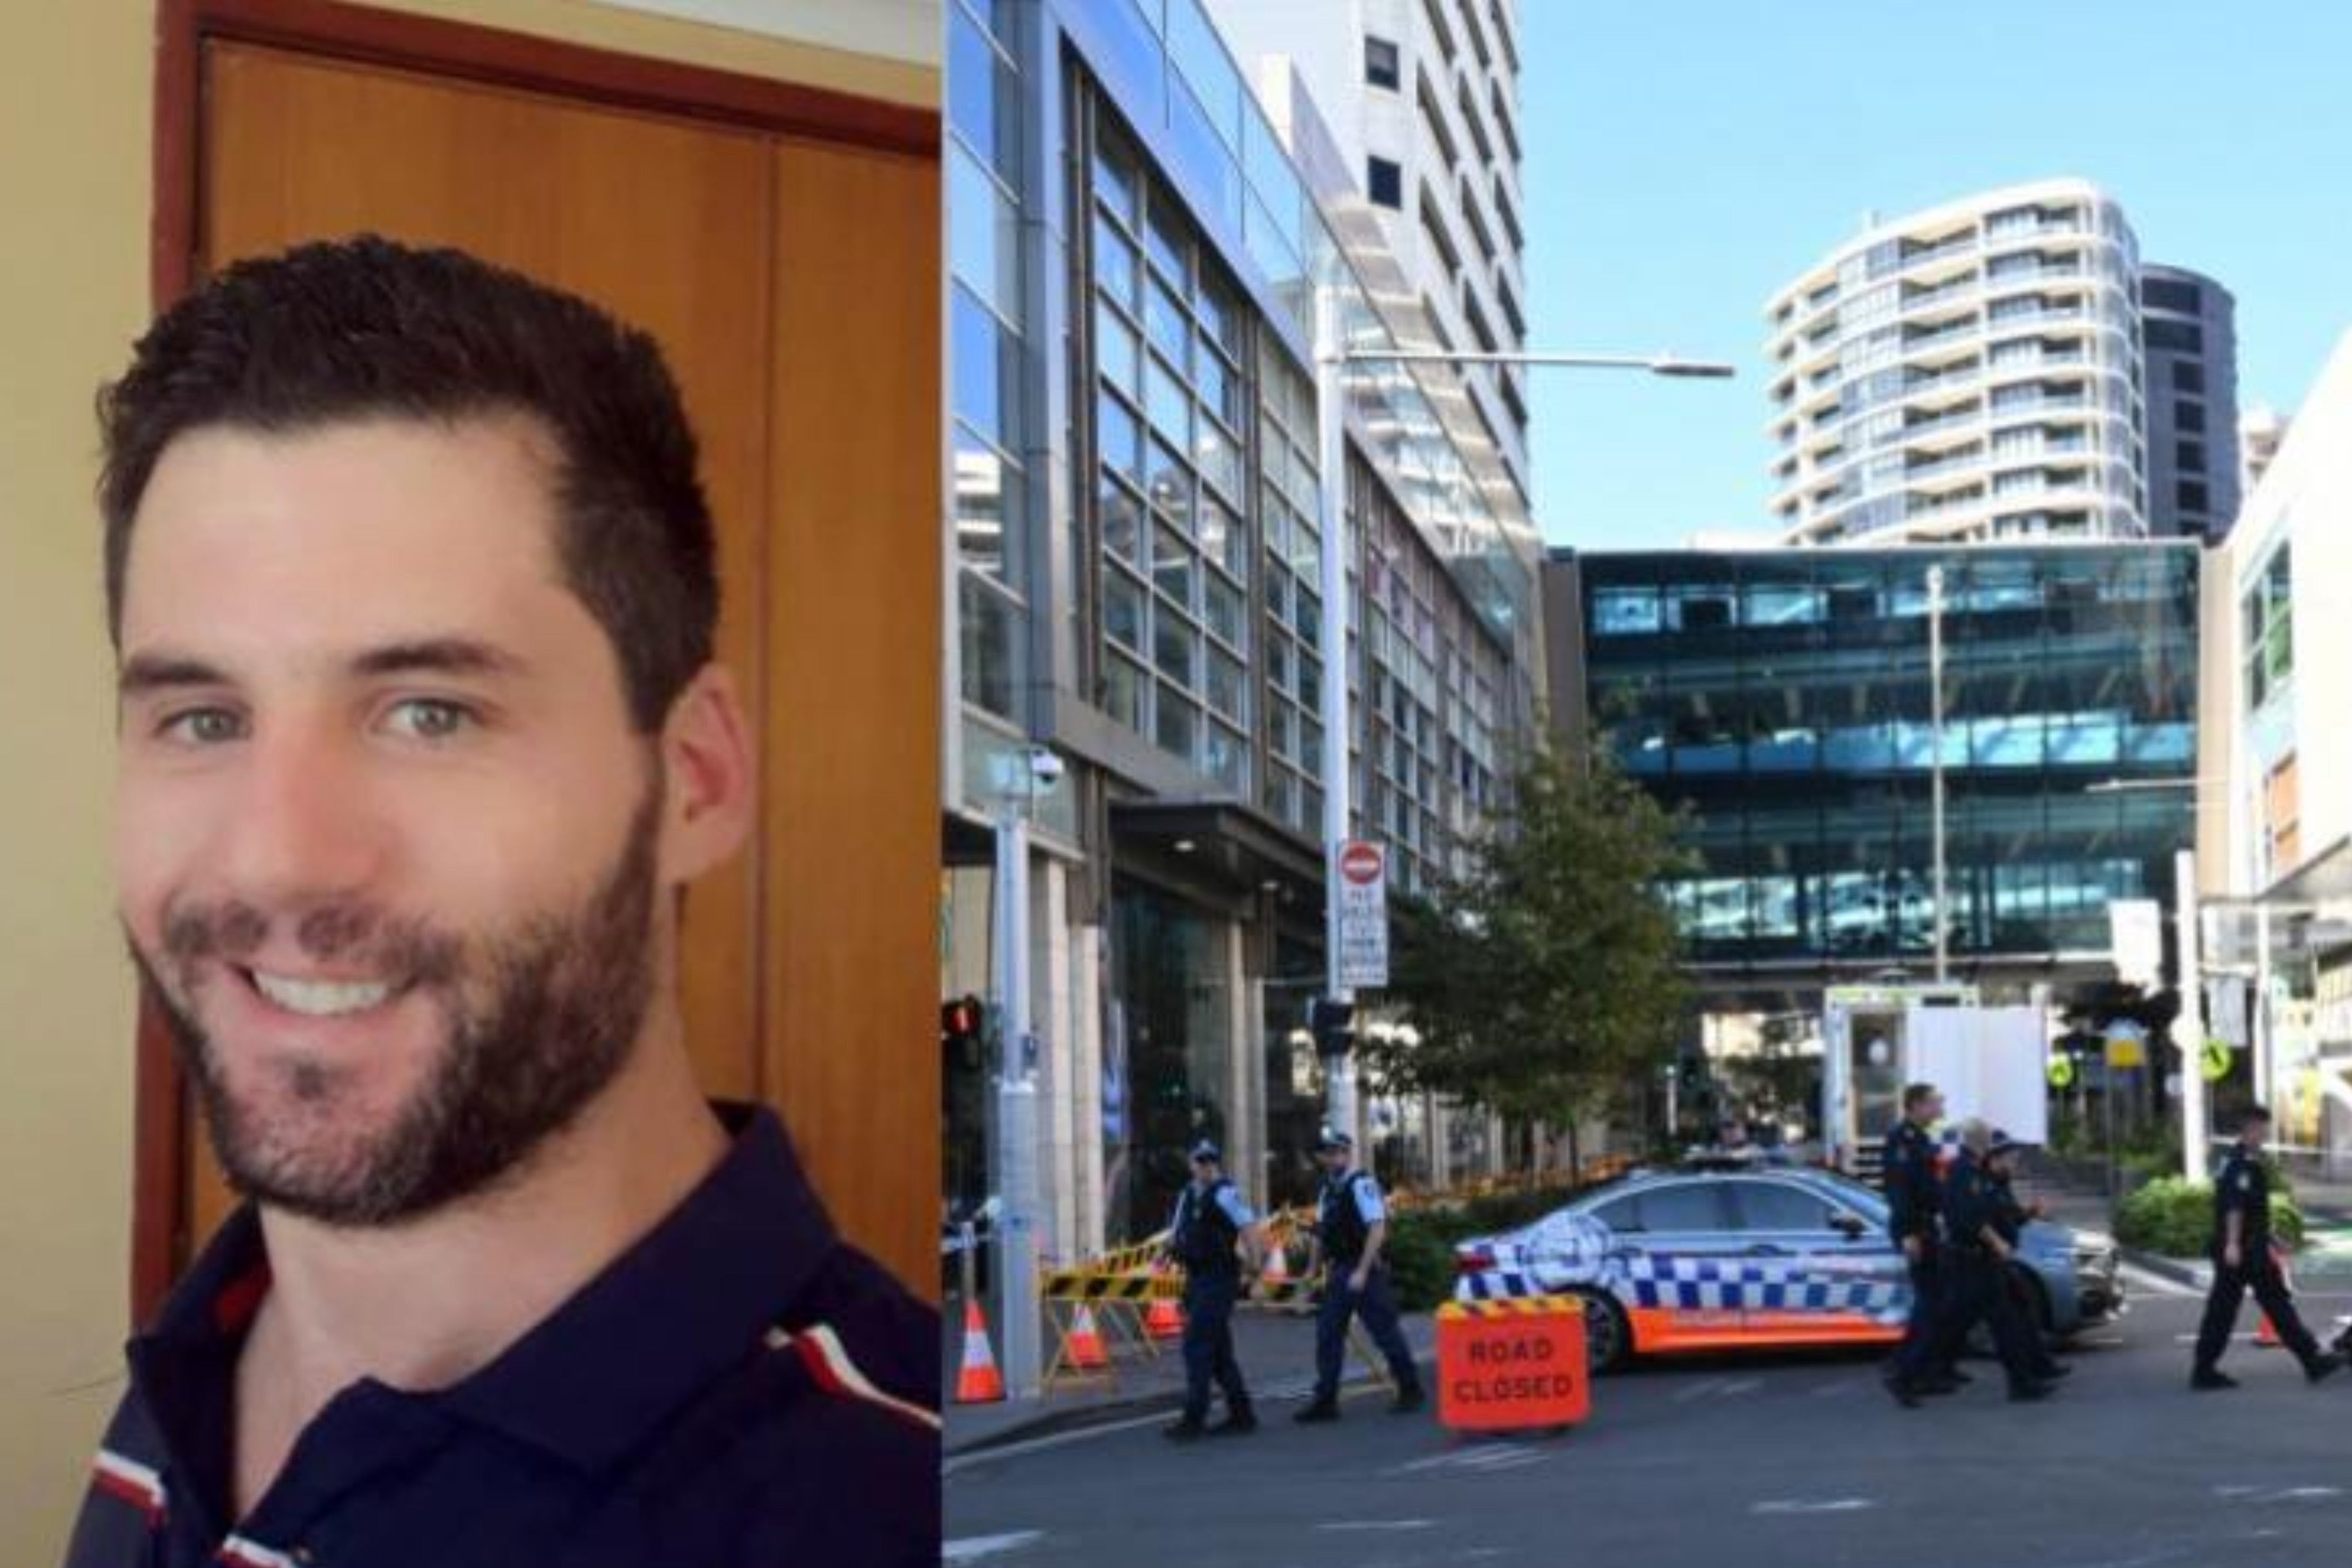 We now know more about Joel Cauchi, the perpetrator of the knife attack in Sydney